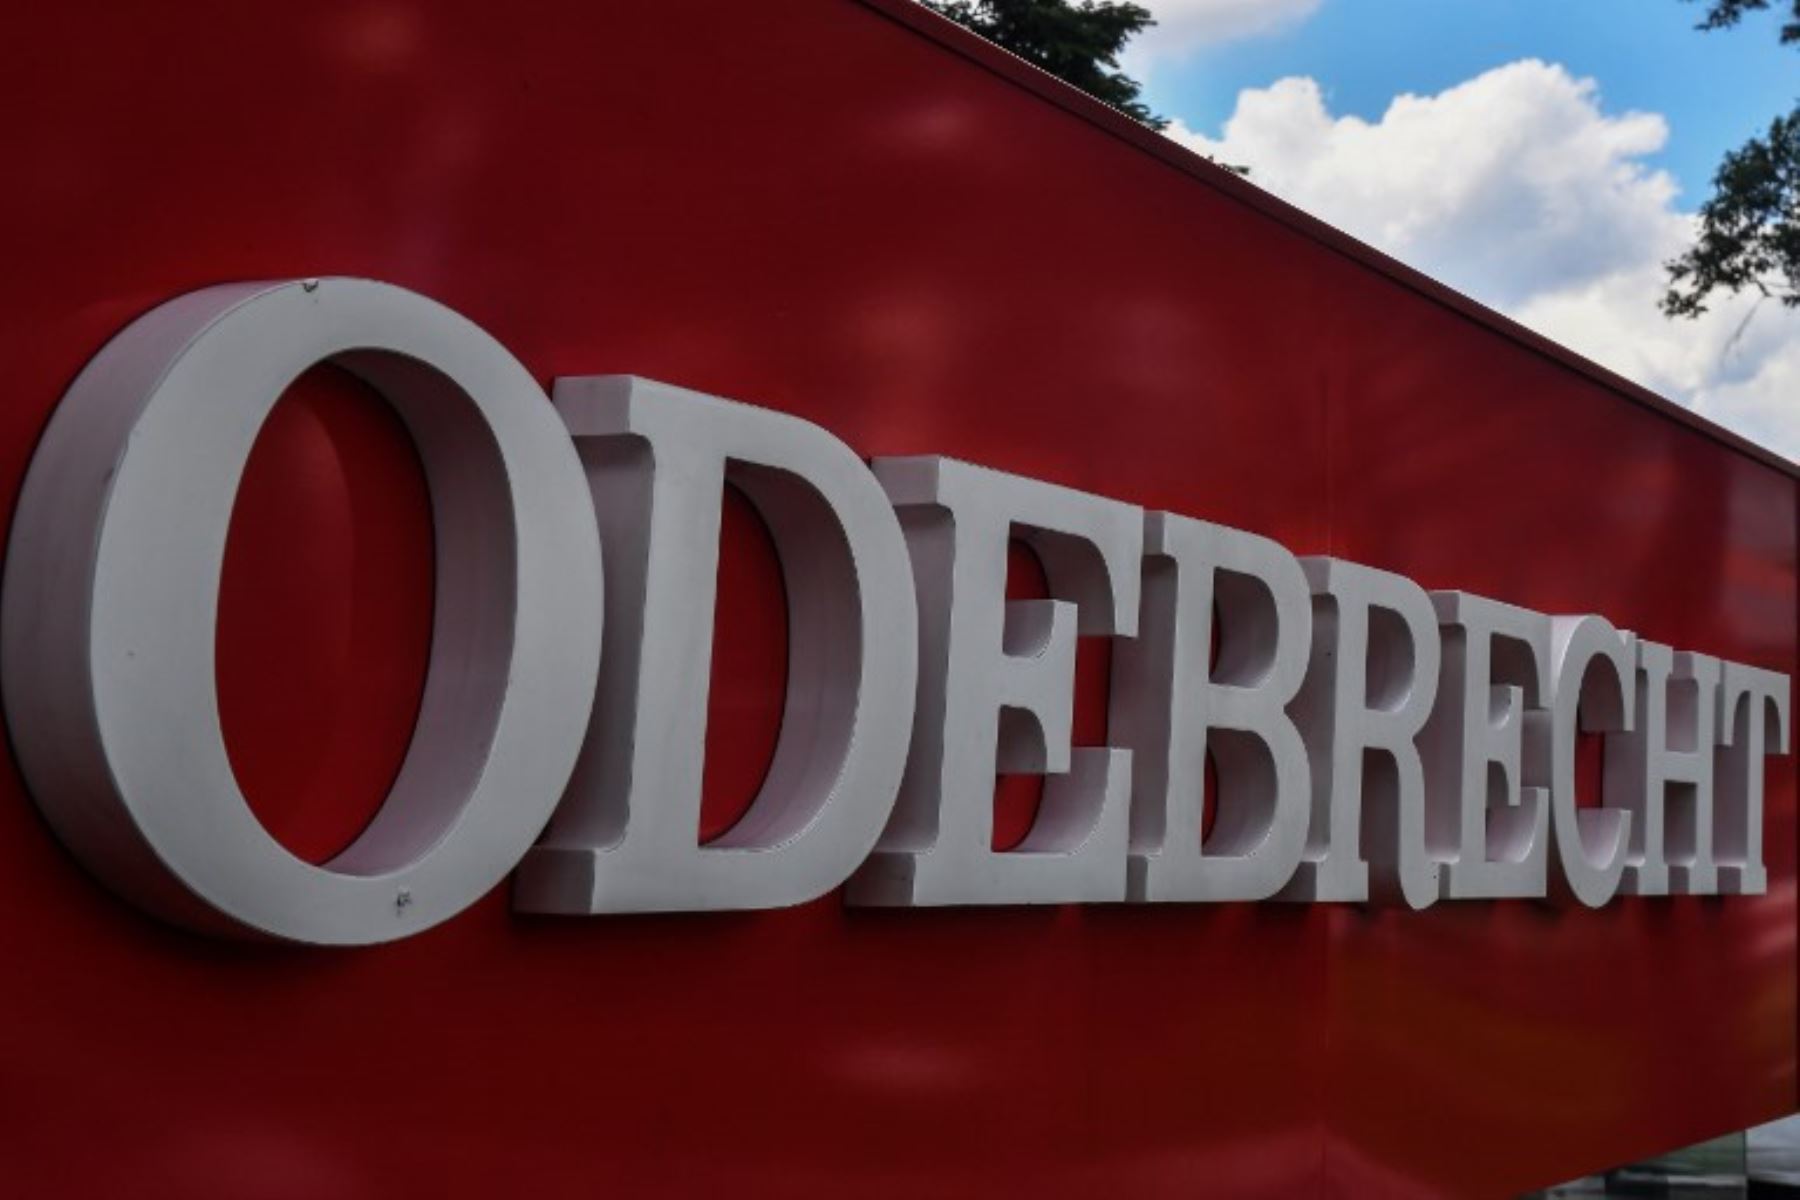 Suspension request was requested by Novonor, the new face of Odebrecht.